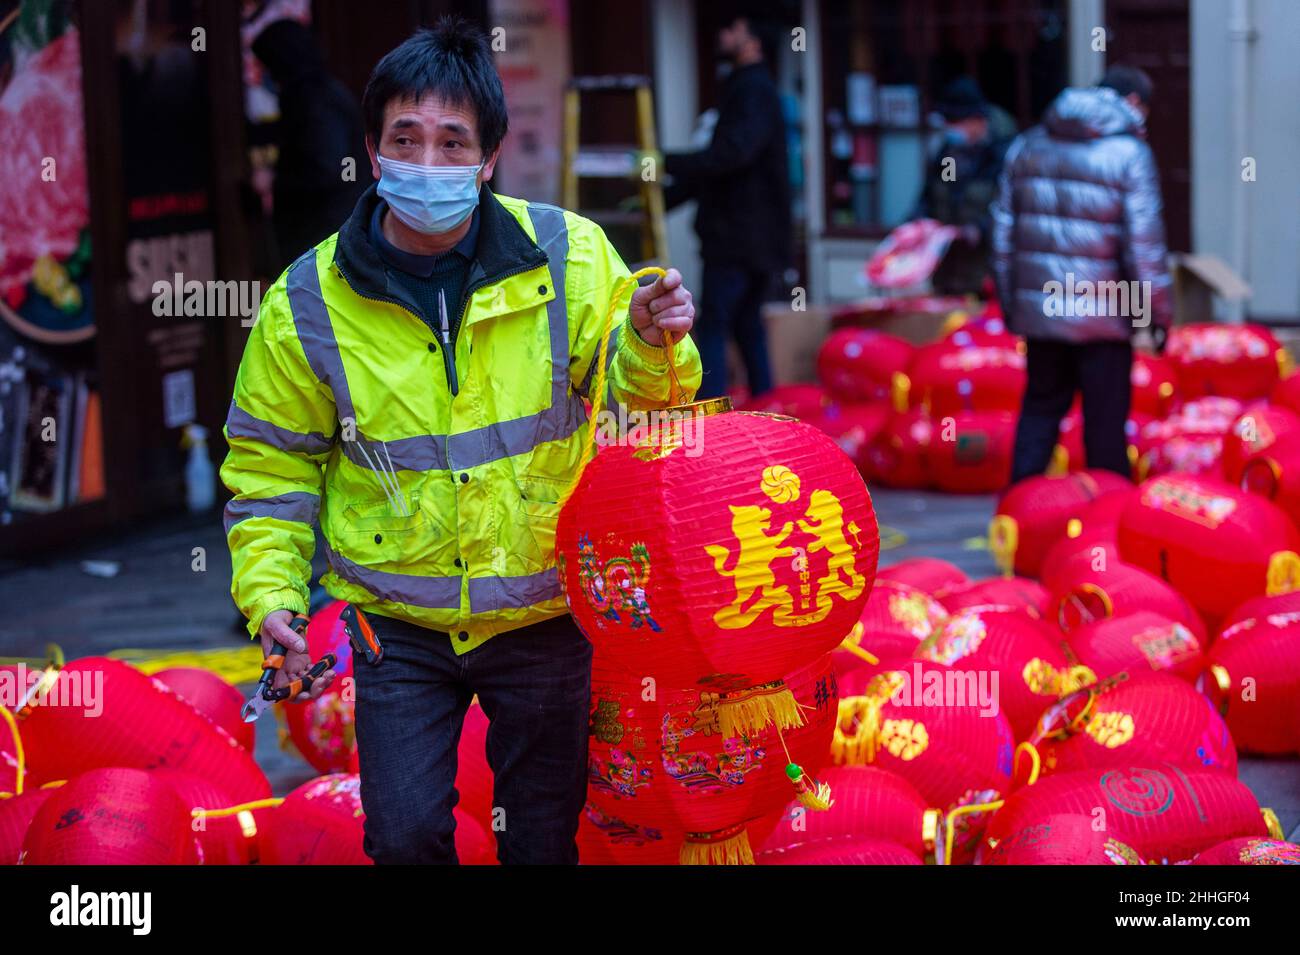 London, UK.  24 January 2022.   A workman carries an assembled lantern in Chinatown ahead of Chinese New Year and The Year of the Tiger officially begins on 1 February.  Festivities on Chinatown are scaled back this year to the pandemic.  Credit: Stephen Chung / Alamy Live News Stock Photo